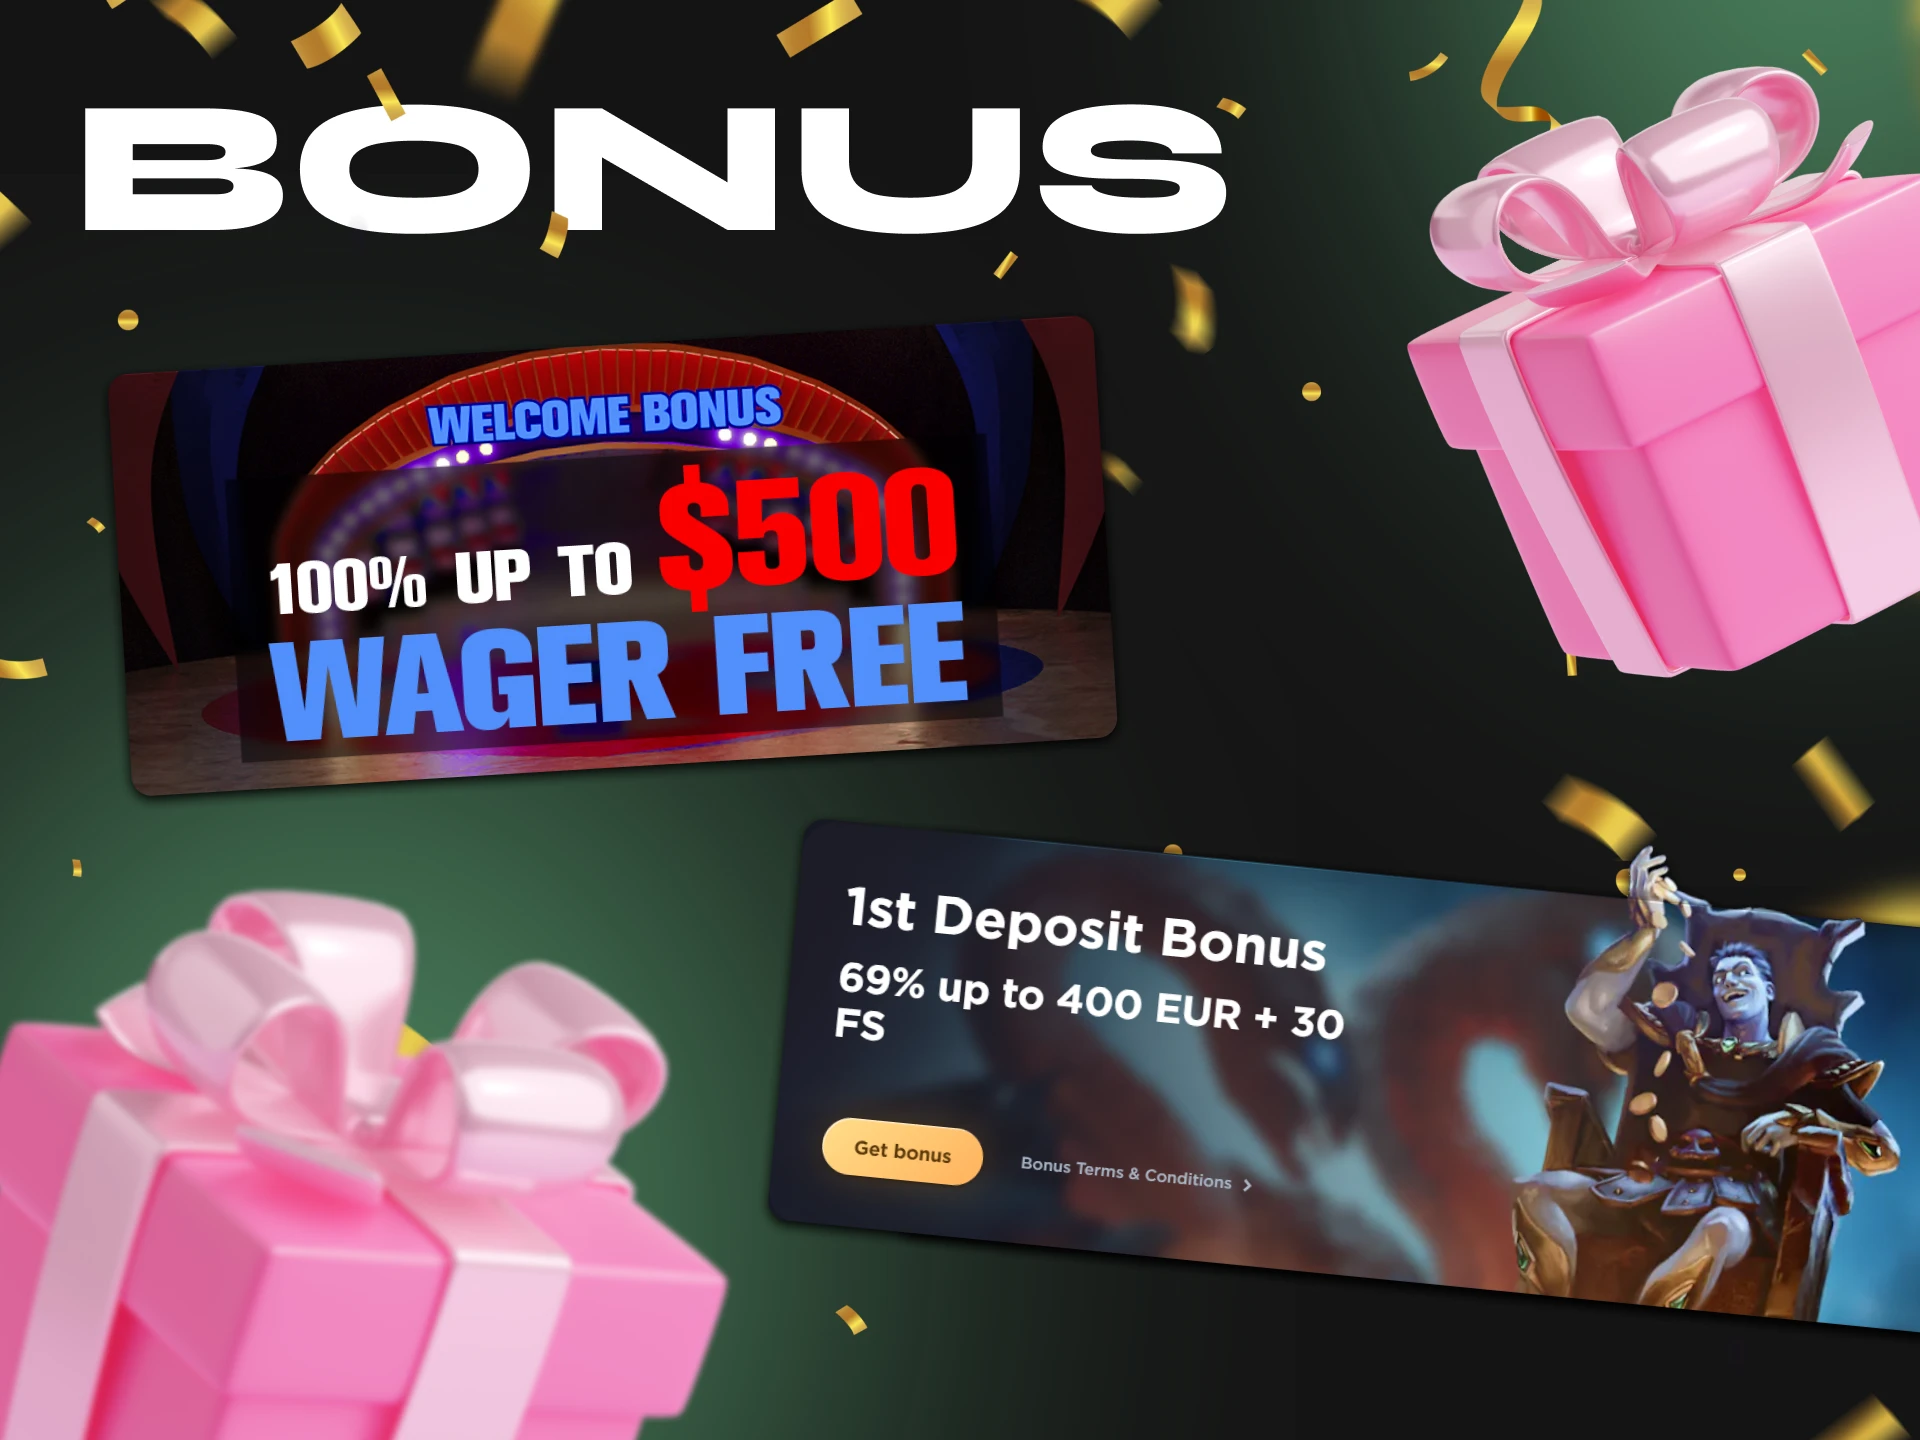 Crypto casinos offer profitable bonuses for their users and newcomers.